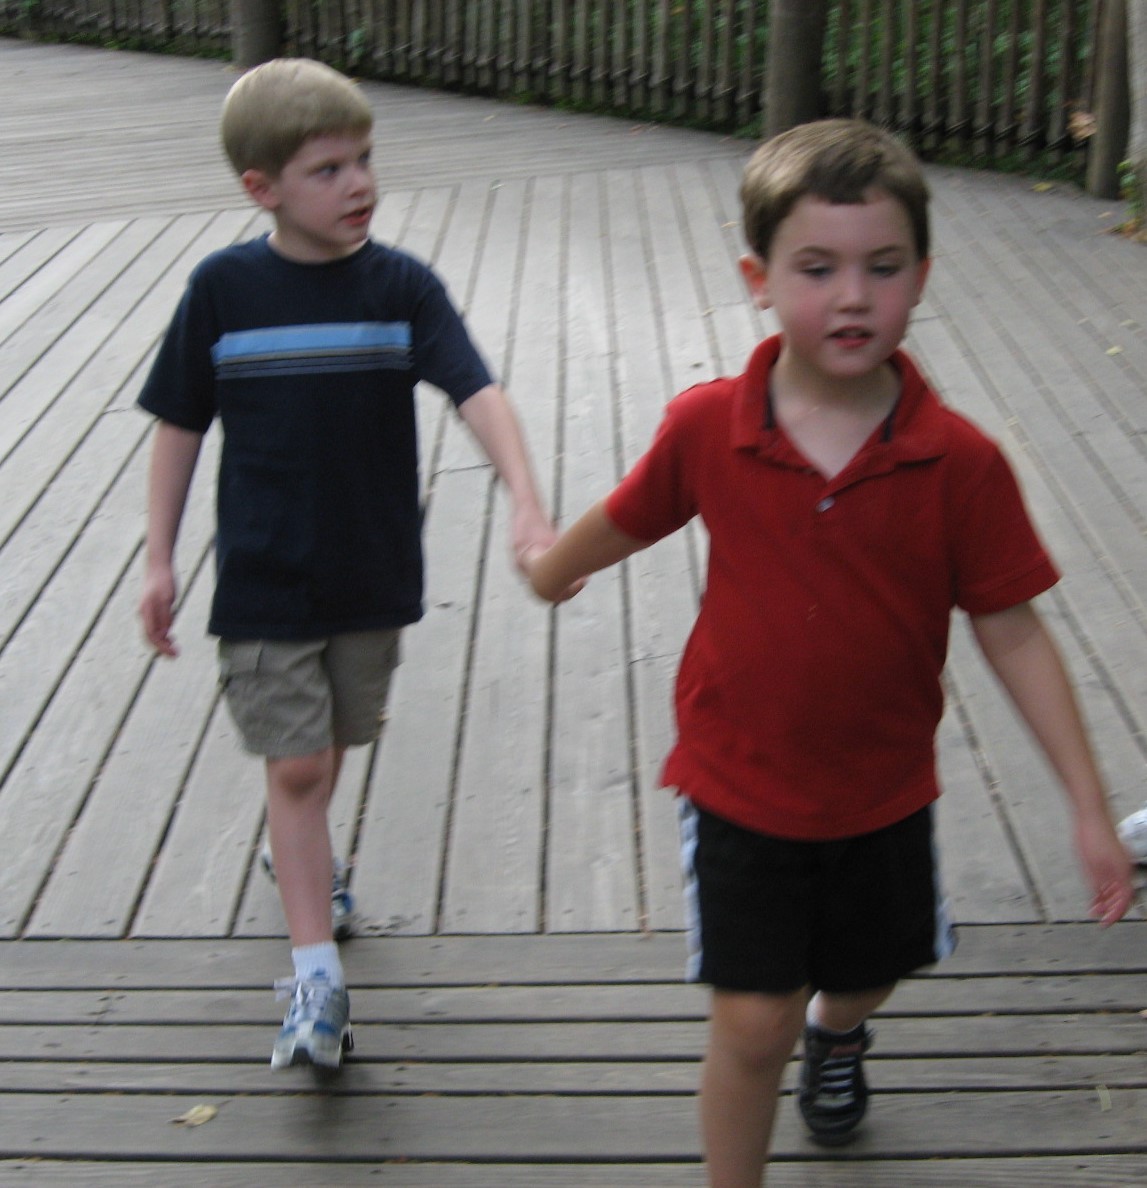 two young boys holding hands on a playground.